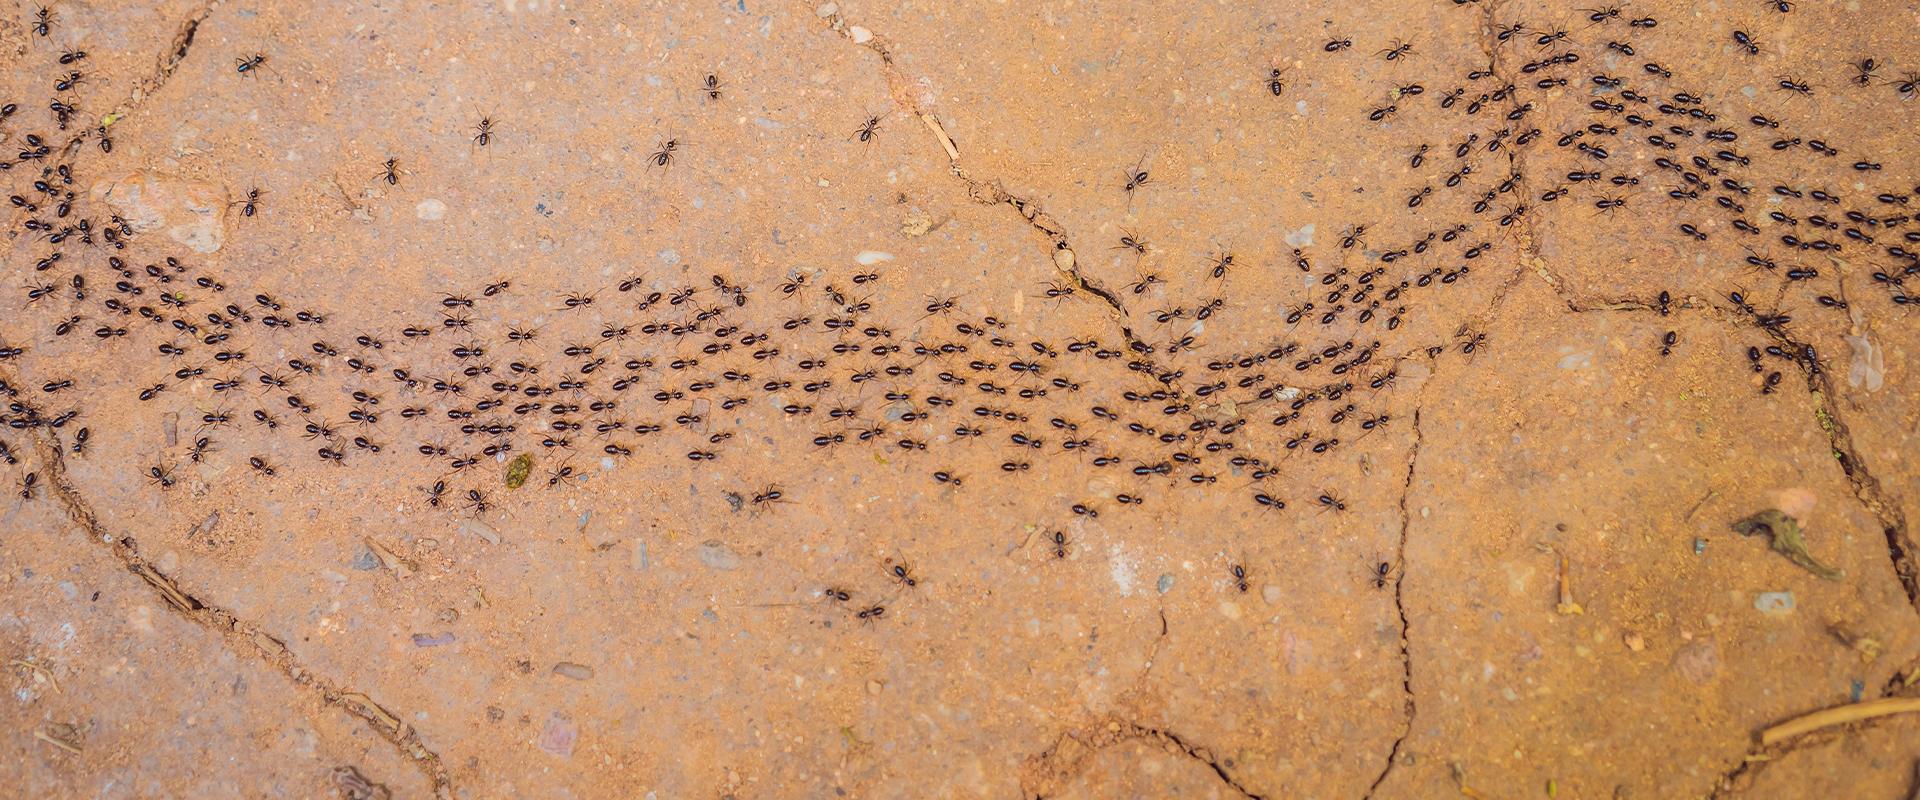 ants marching on the dirt